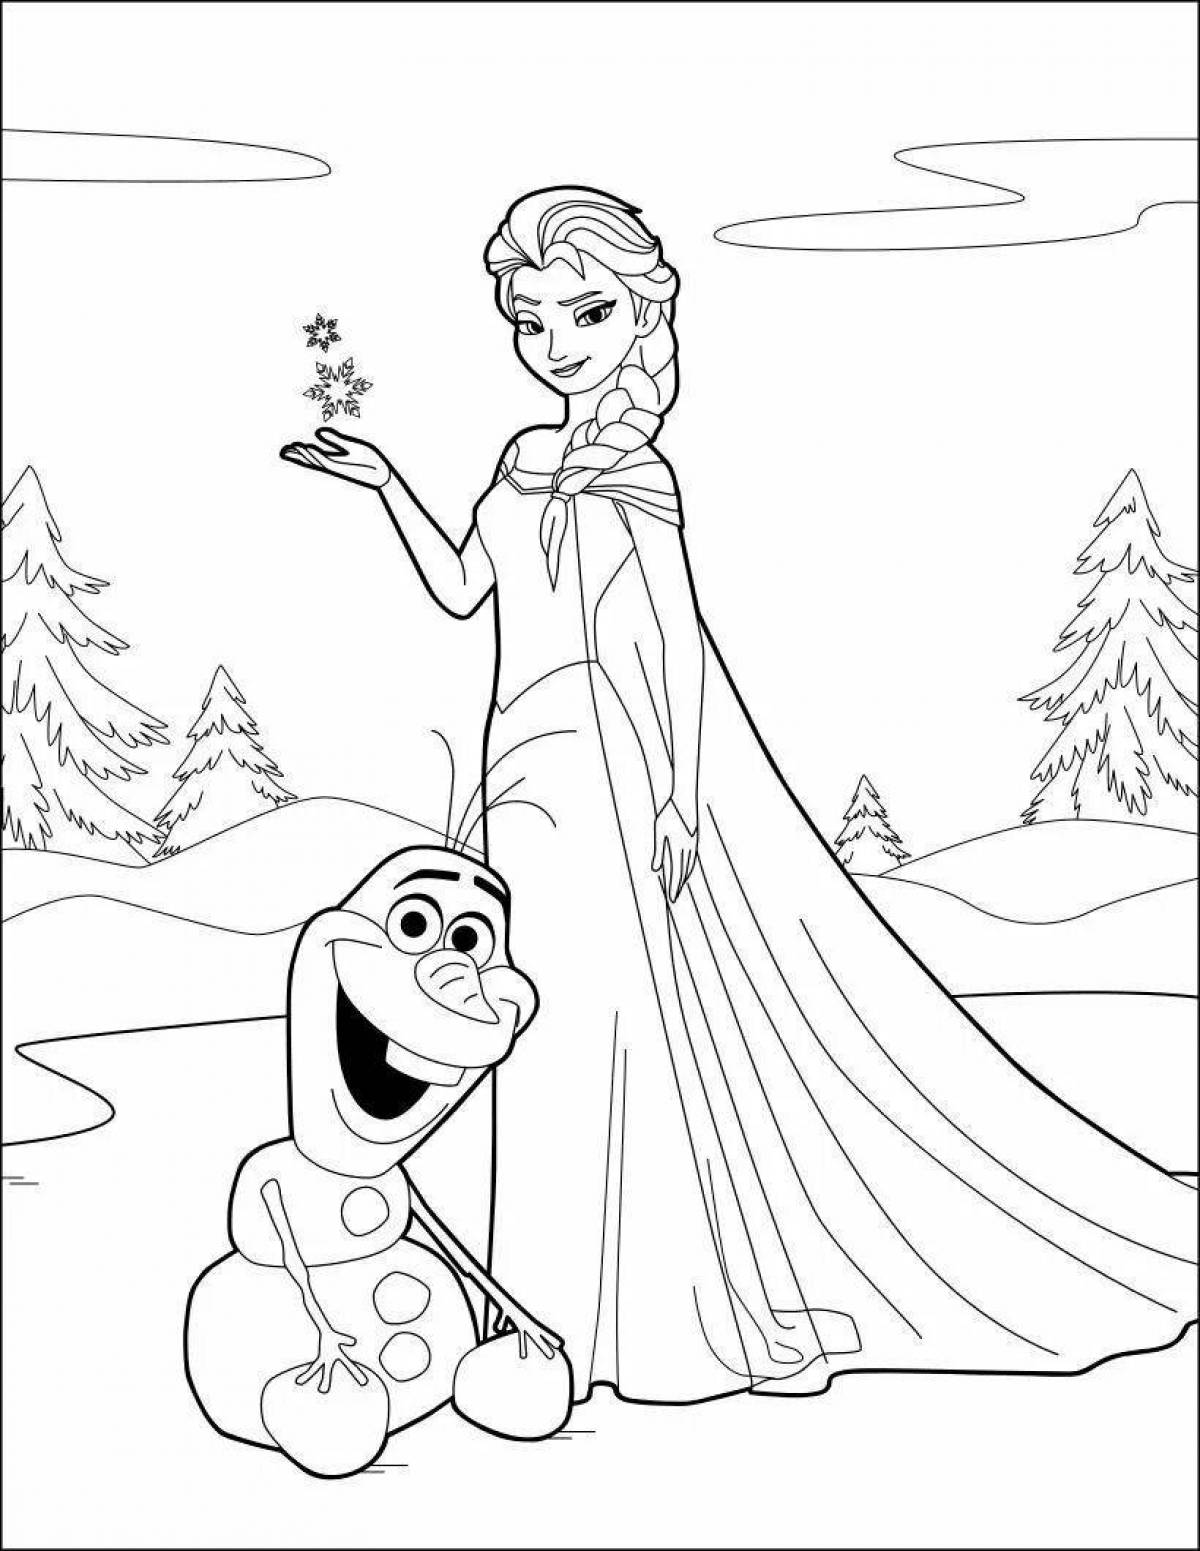 Charming coloring anna and olaf